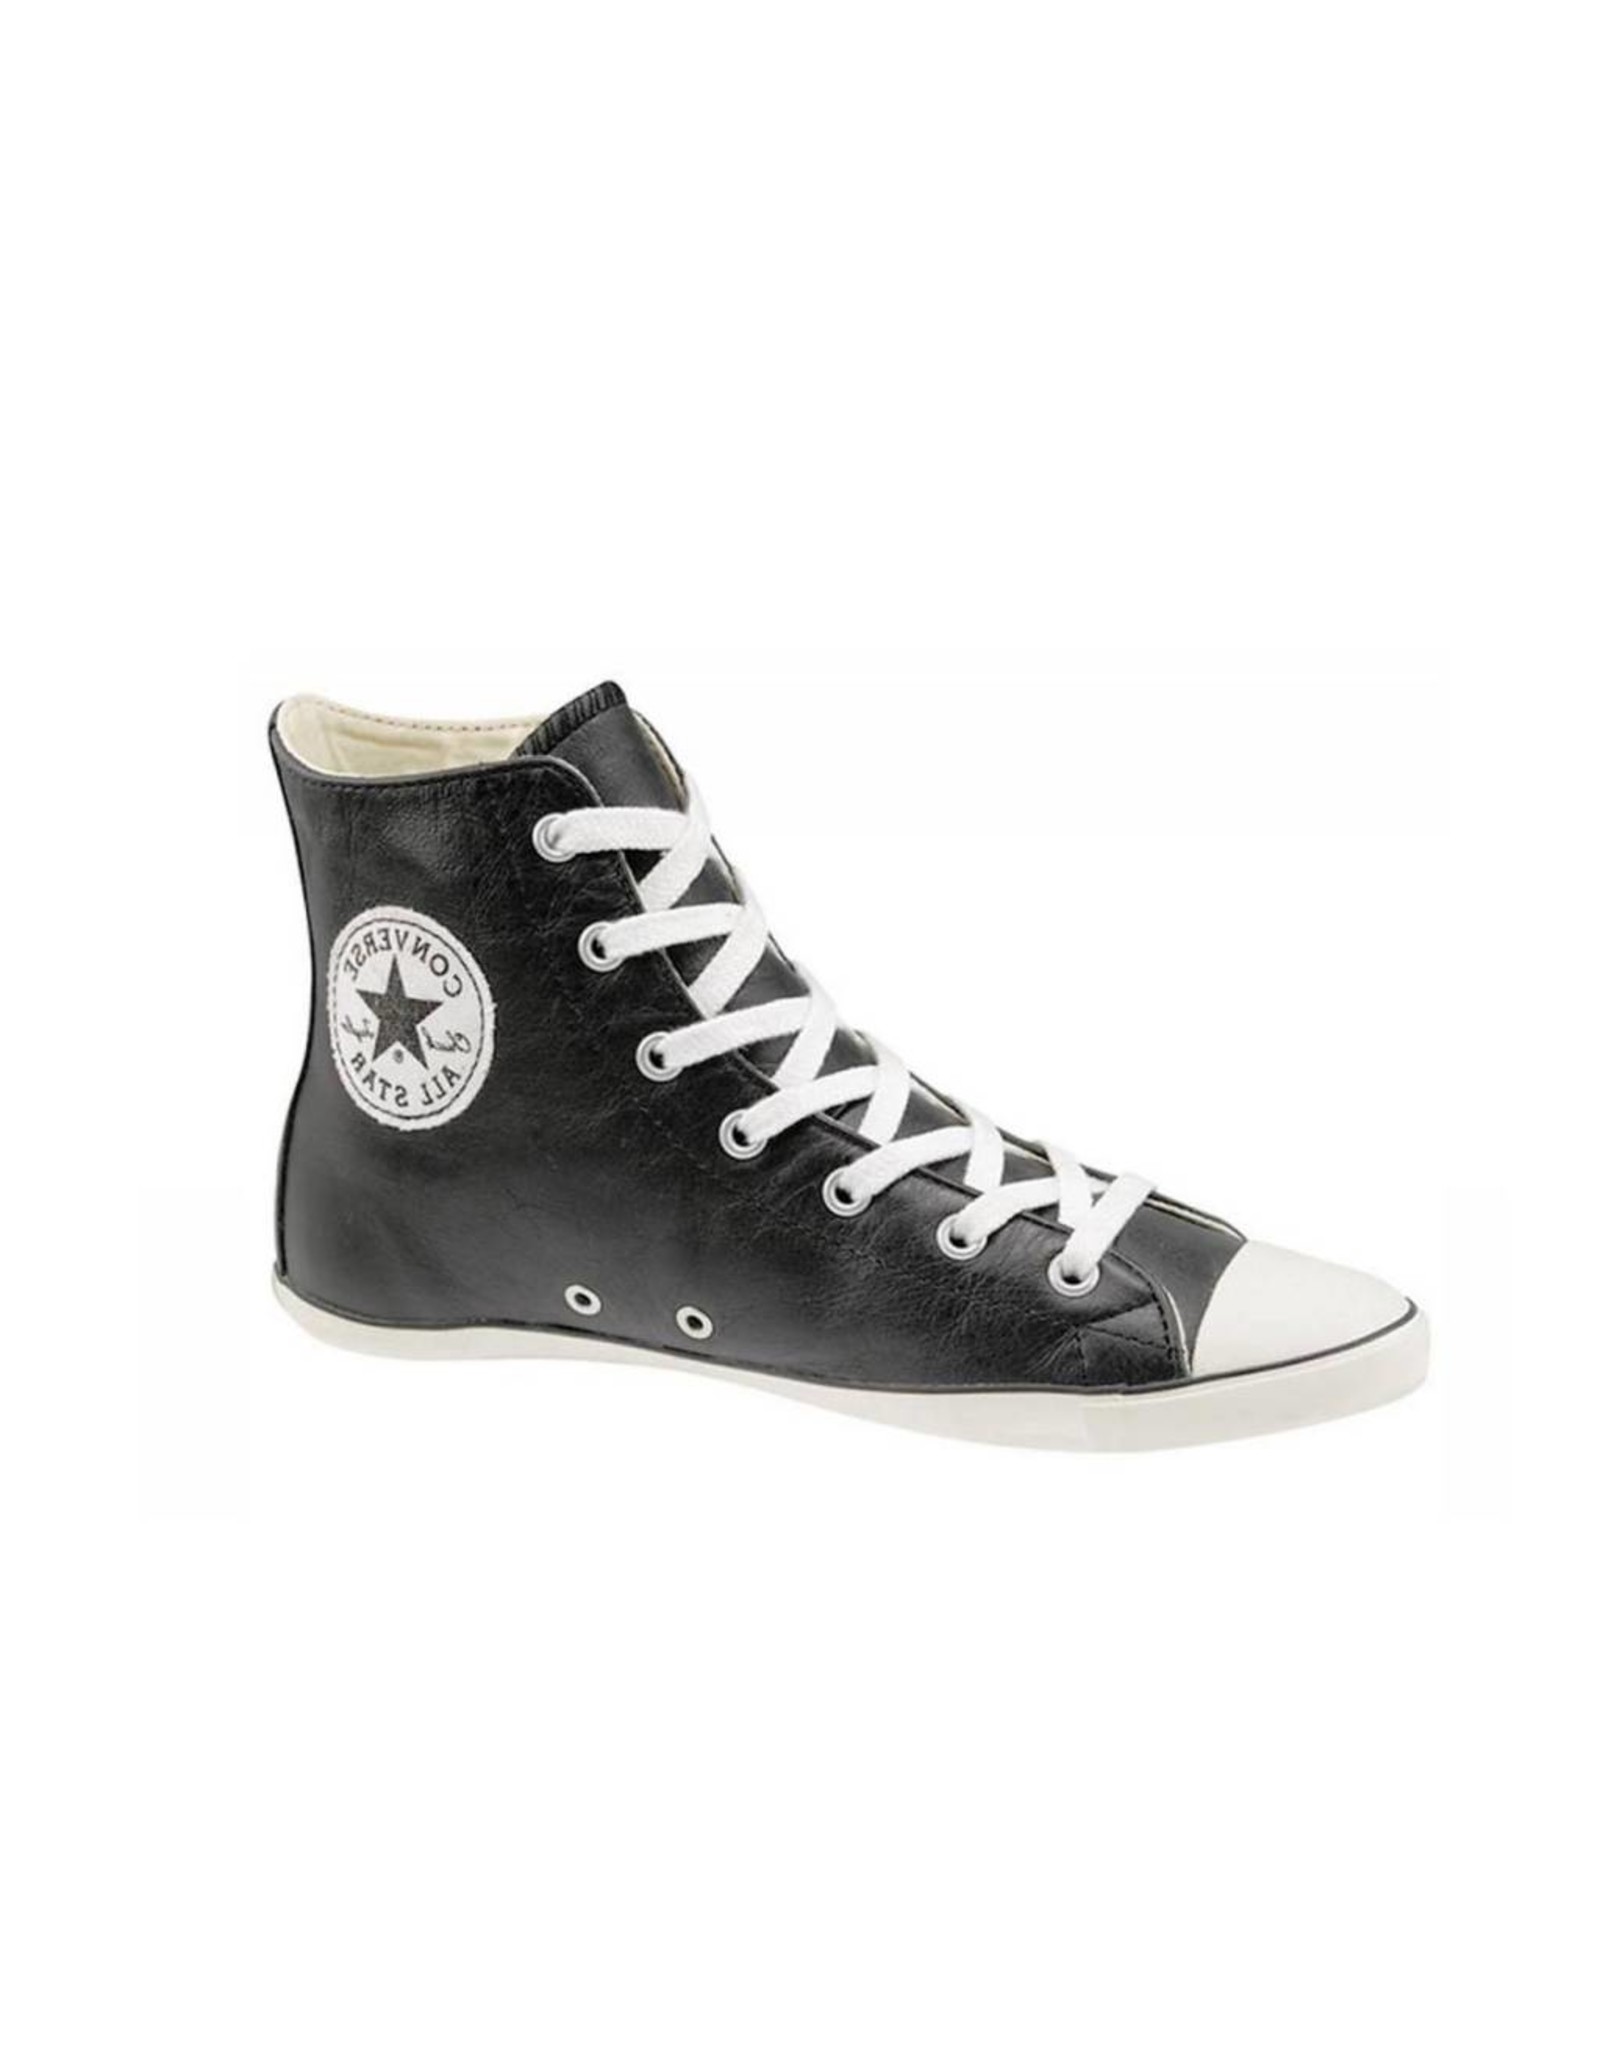 buy converse all star